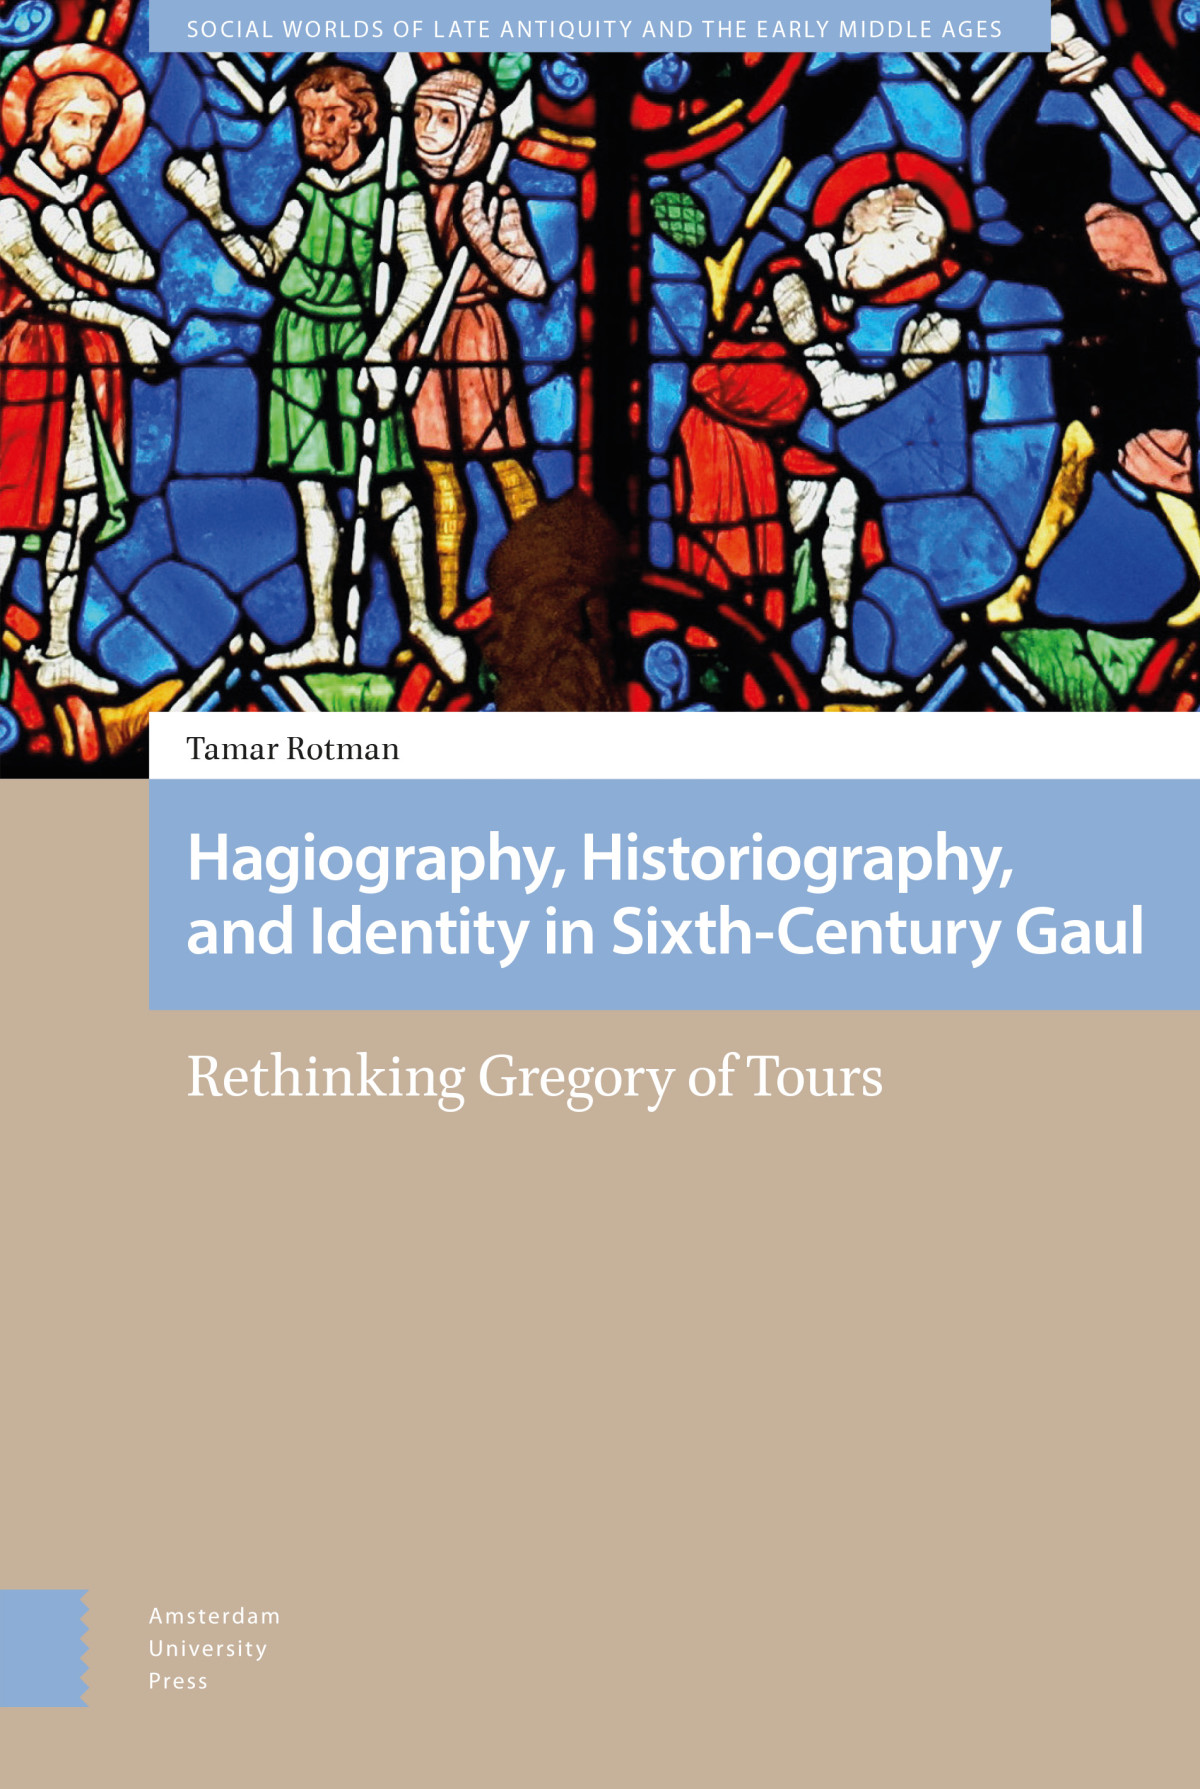 what is biography and hagiography